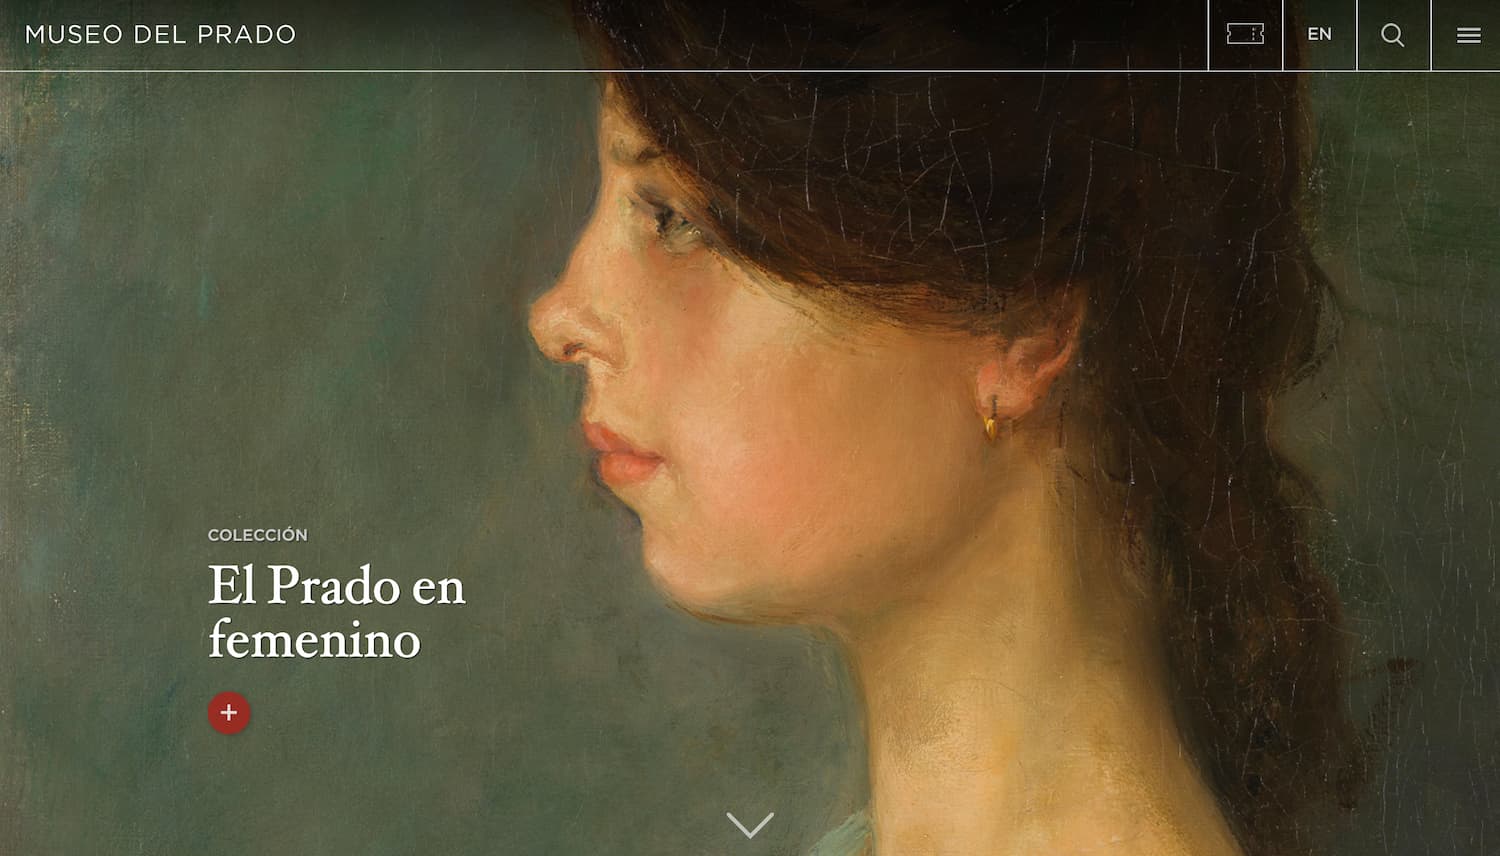 homepage for the museum website museo del prado